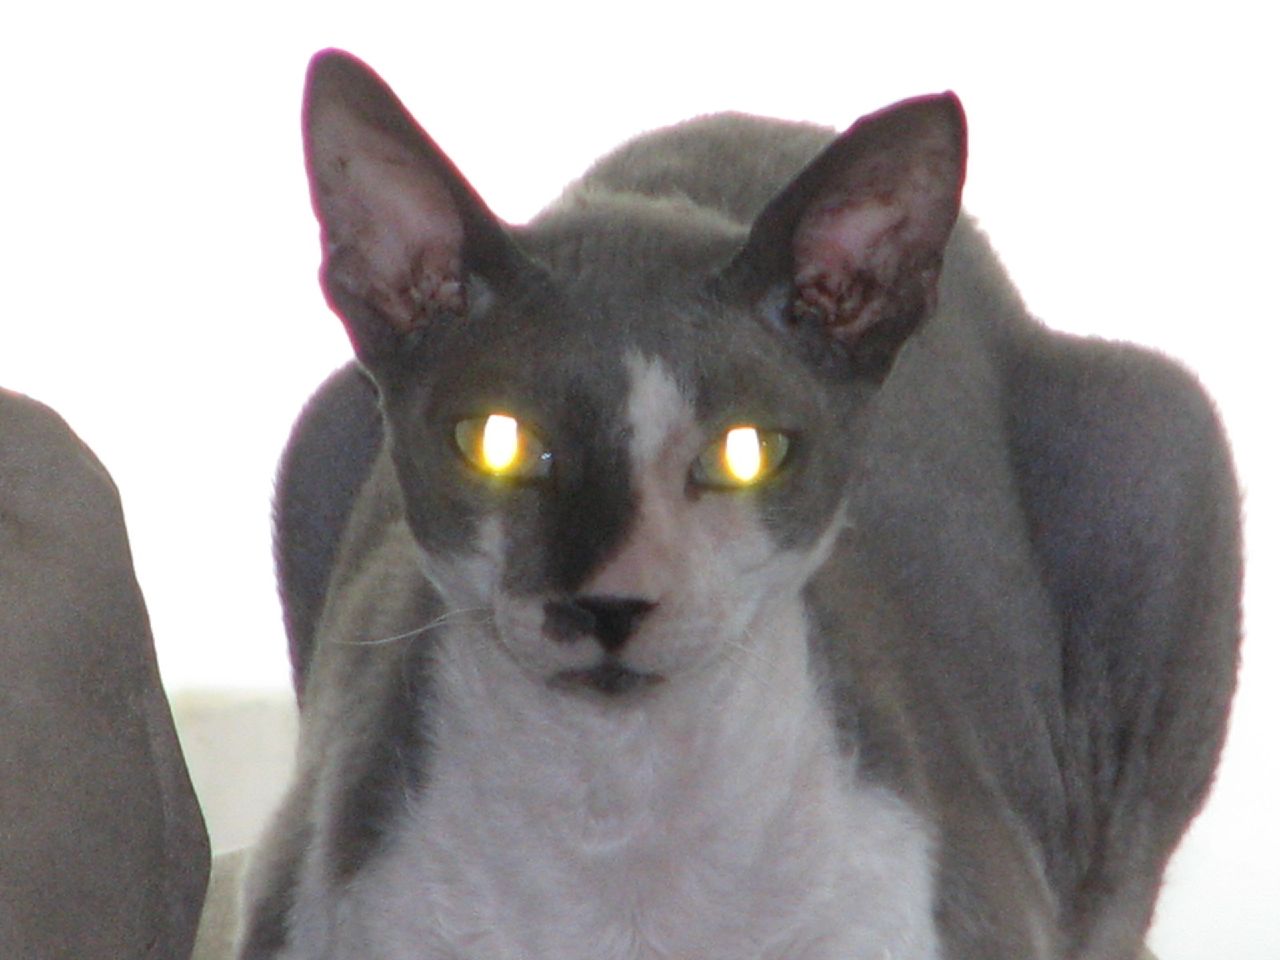 there is a cat with yellow eyes on the camera